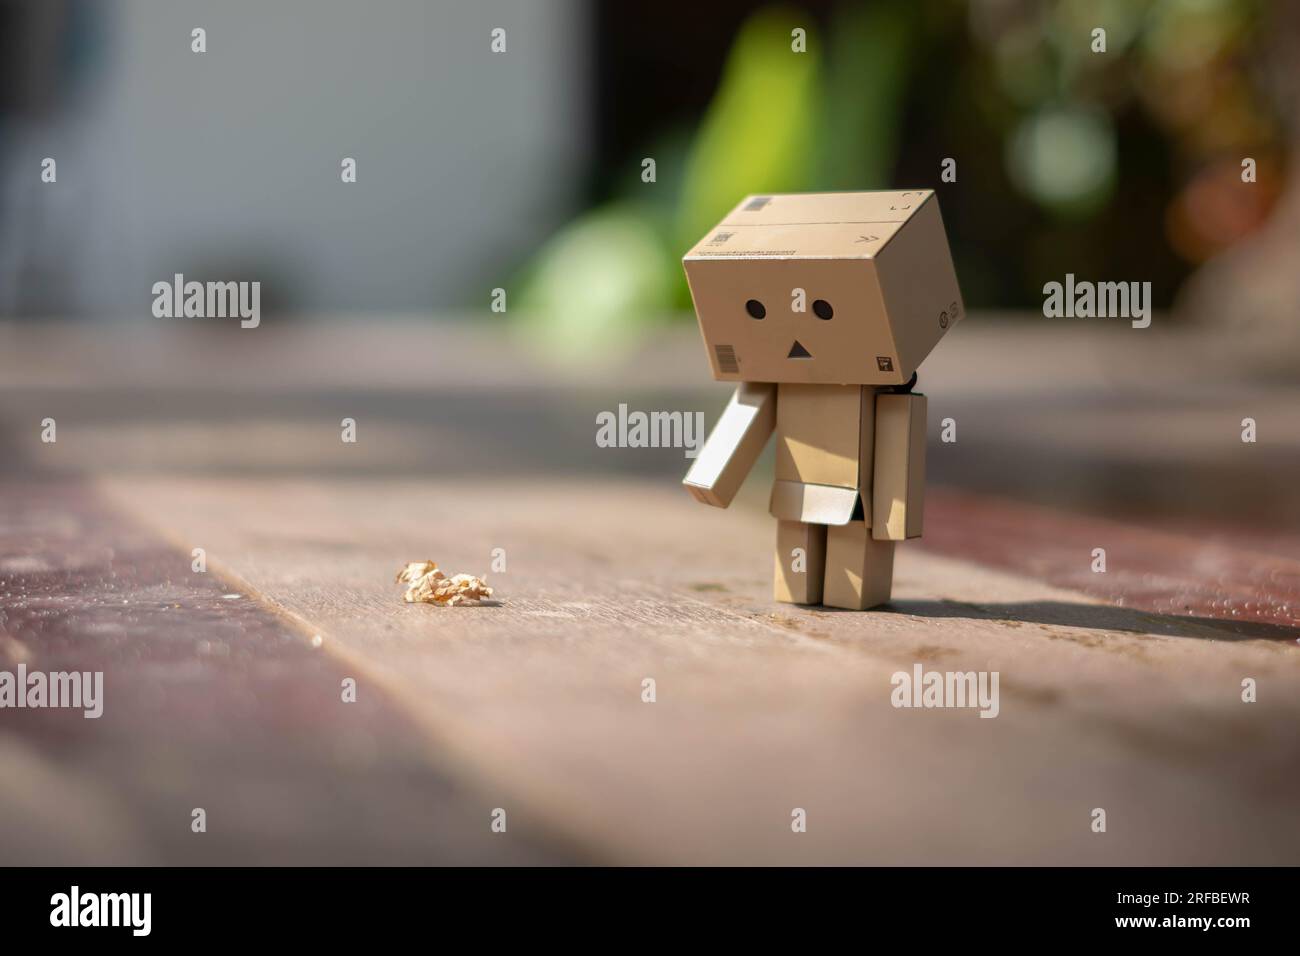 Small wooden toy robot danbo lonely isolated alone sad character, wood floor outdoor cartoon box anime happy art concept nature summer, brown doll cut Stock Photo